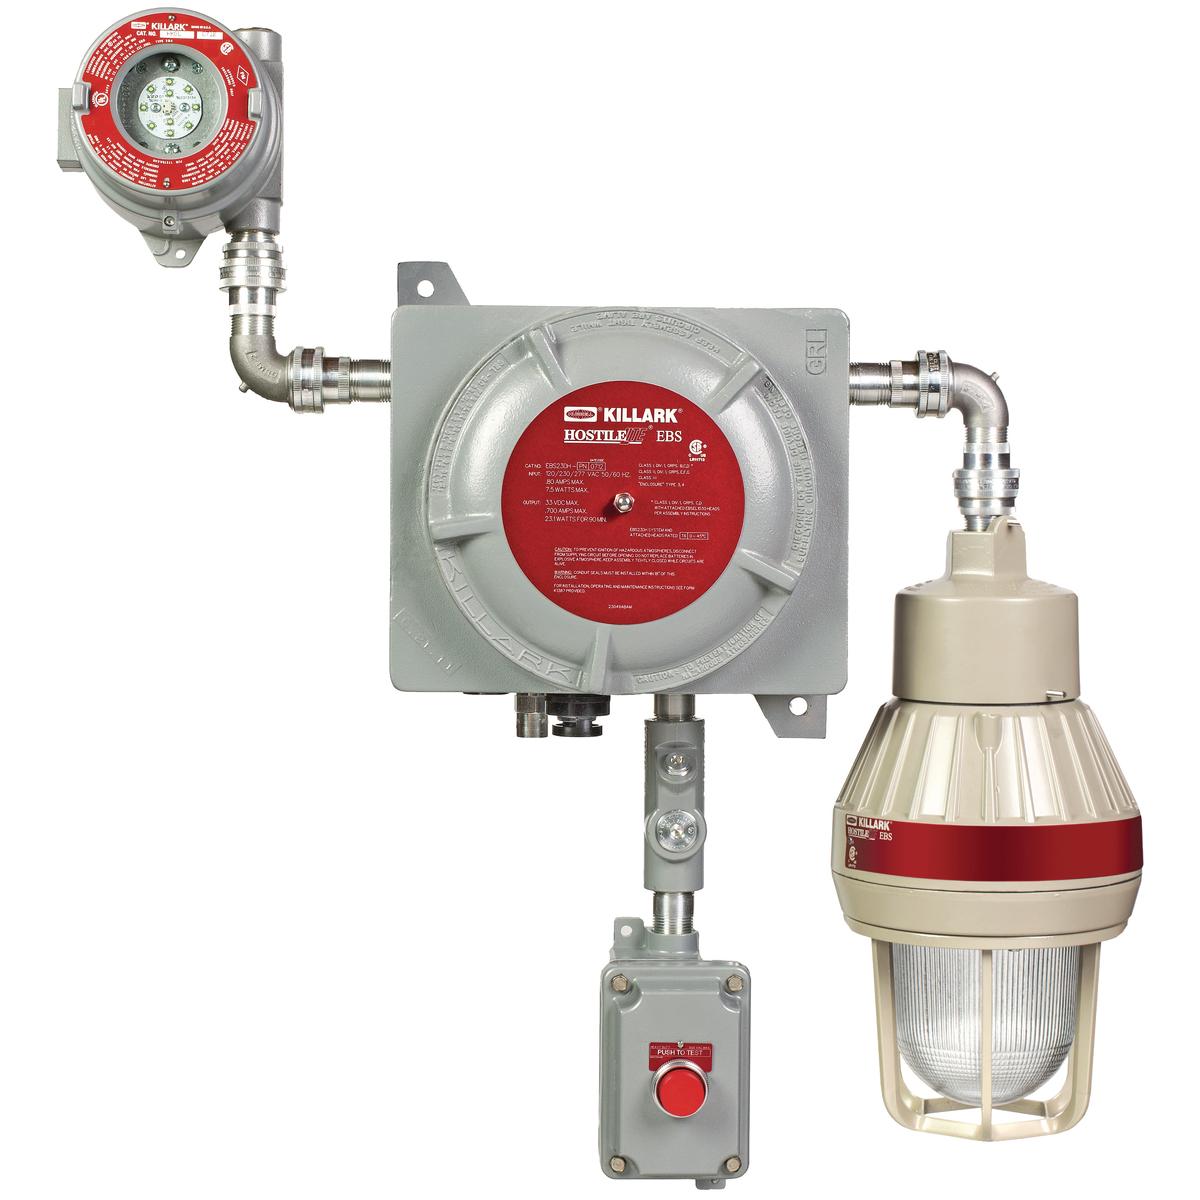 Hubbell EBS23DH-RNCG The EBS Series Explosion Proof LED Emergency Battery Backup System is designed for egress or anti-panic applications. This fixture is made with a cast copper-free aluminum housing and fixture heads that are powder epoxy powder coat painted for extra corro